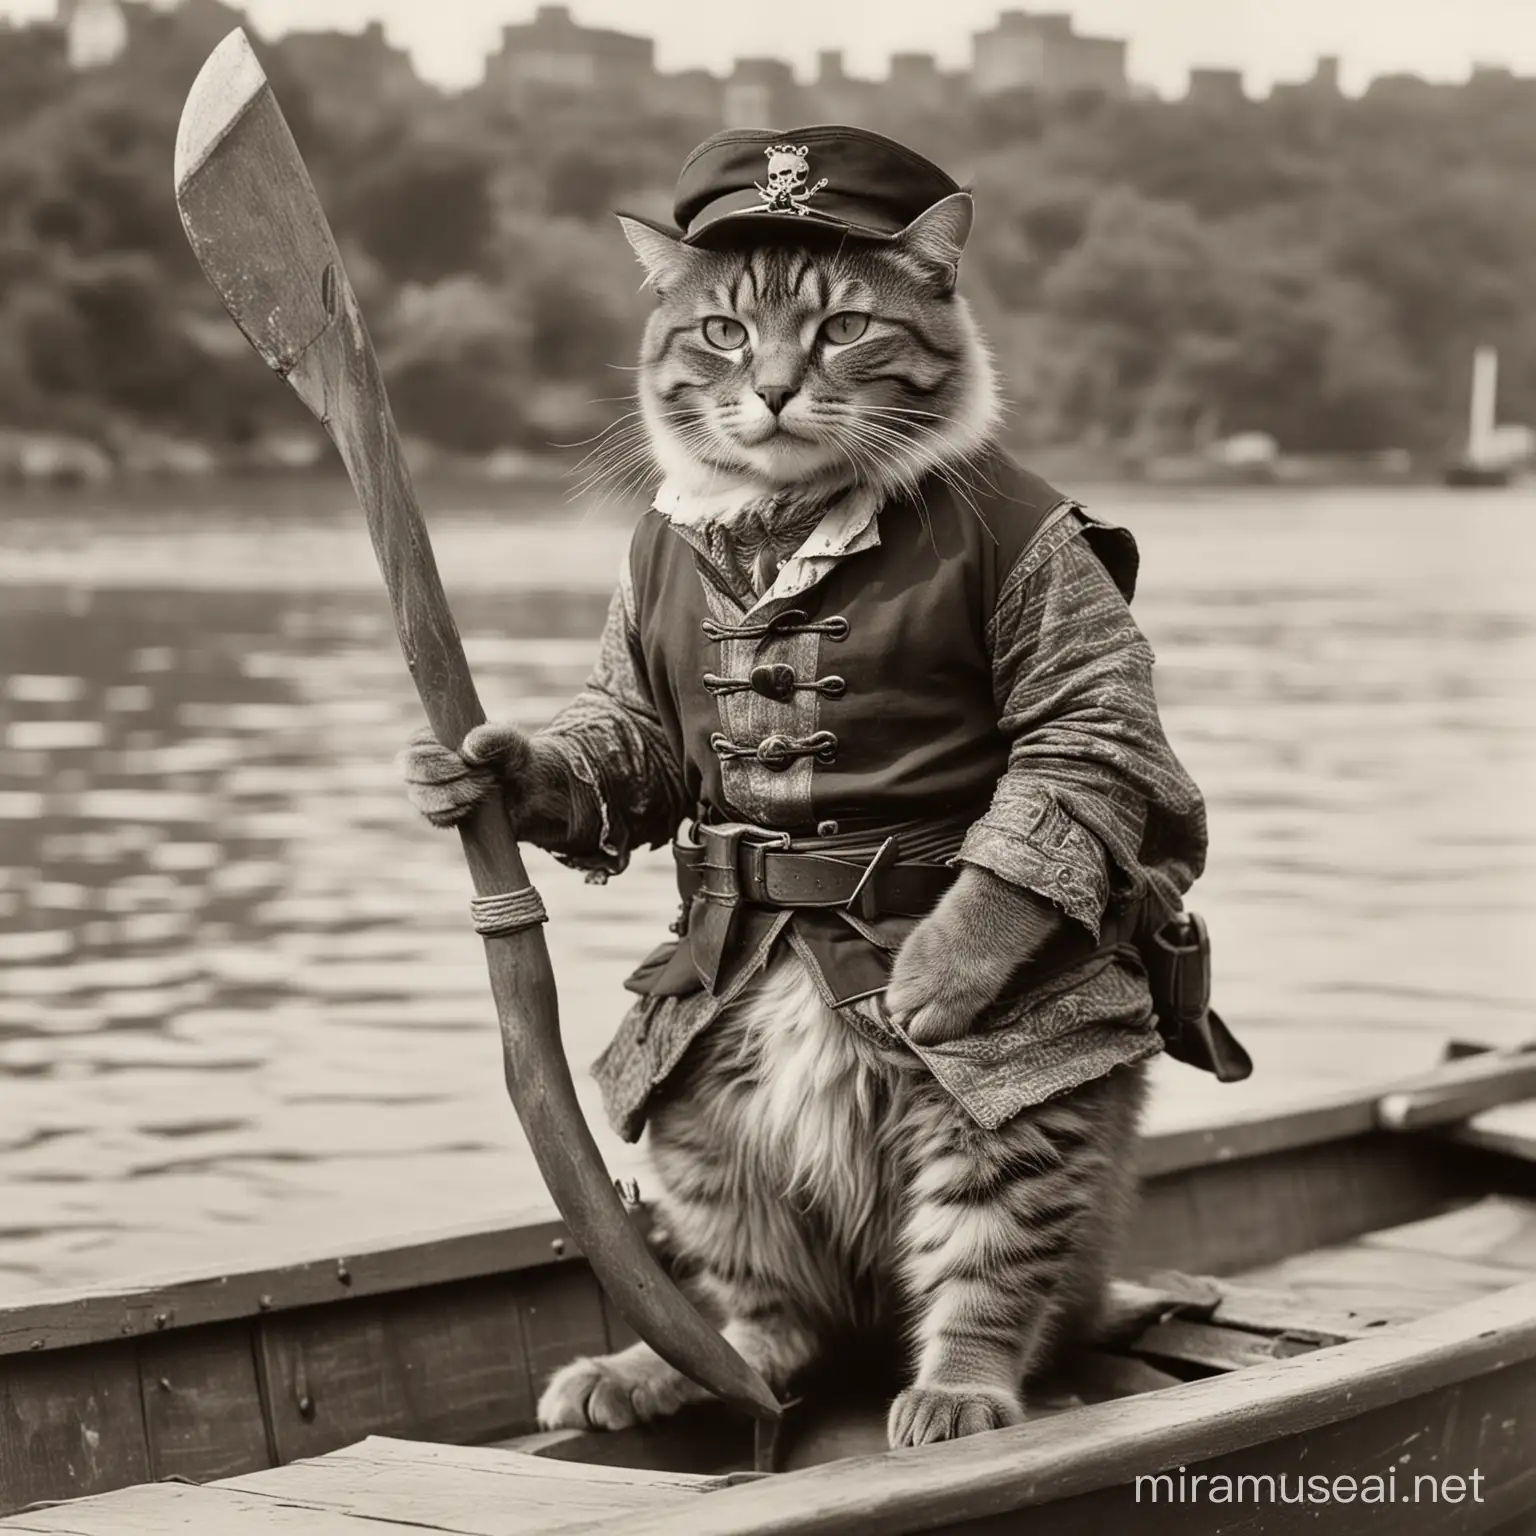 an antorpomorphic cat in 1920, dressed as a river pirate, with a small axe in one hand, on a small boat on the Hudson River